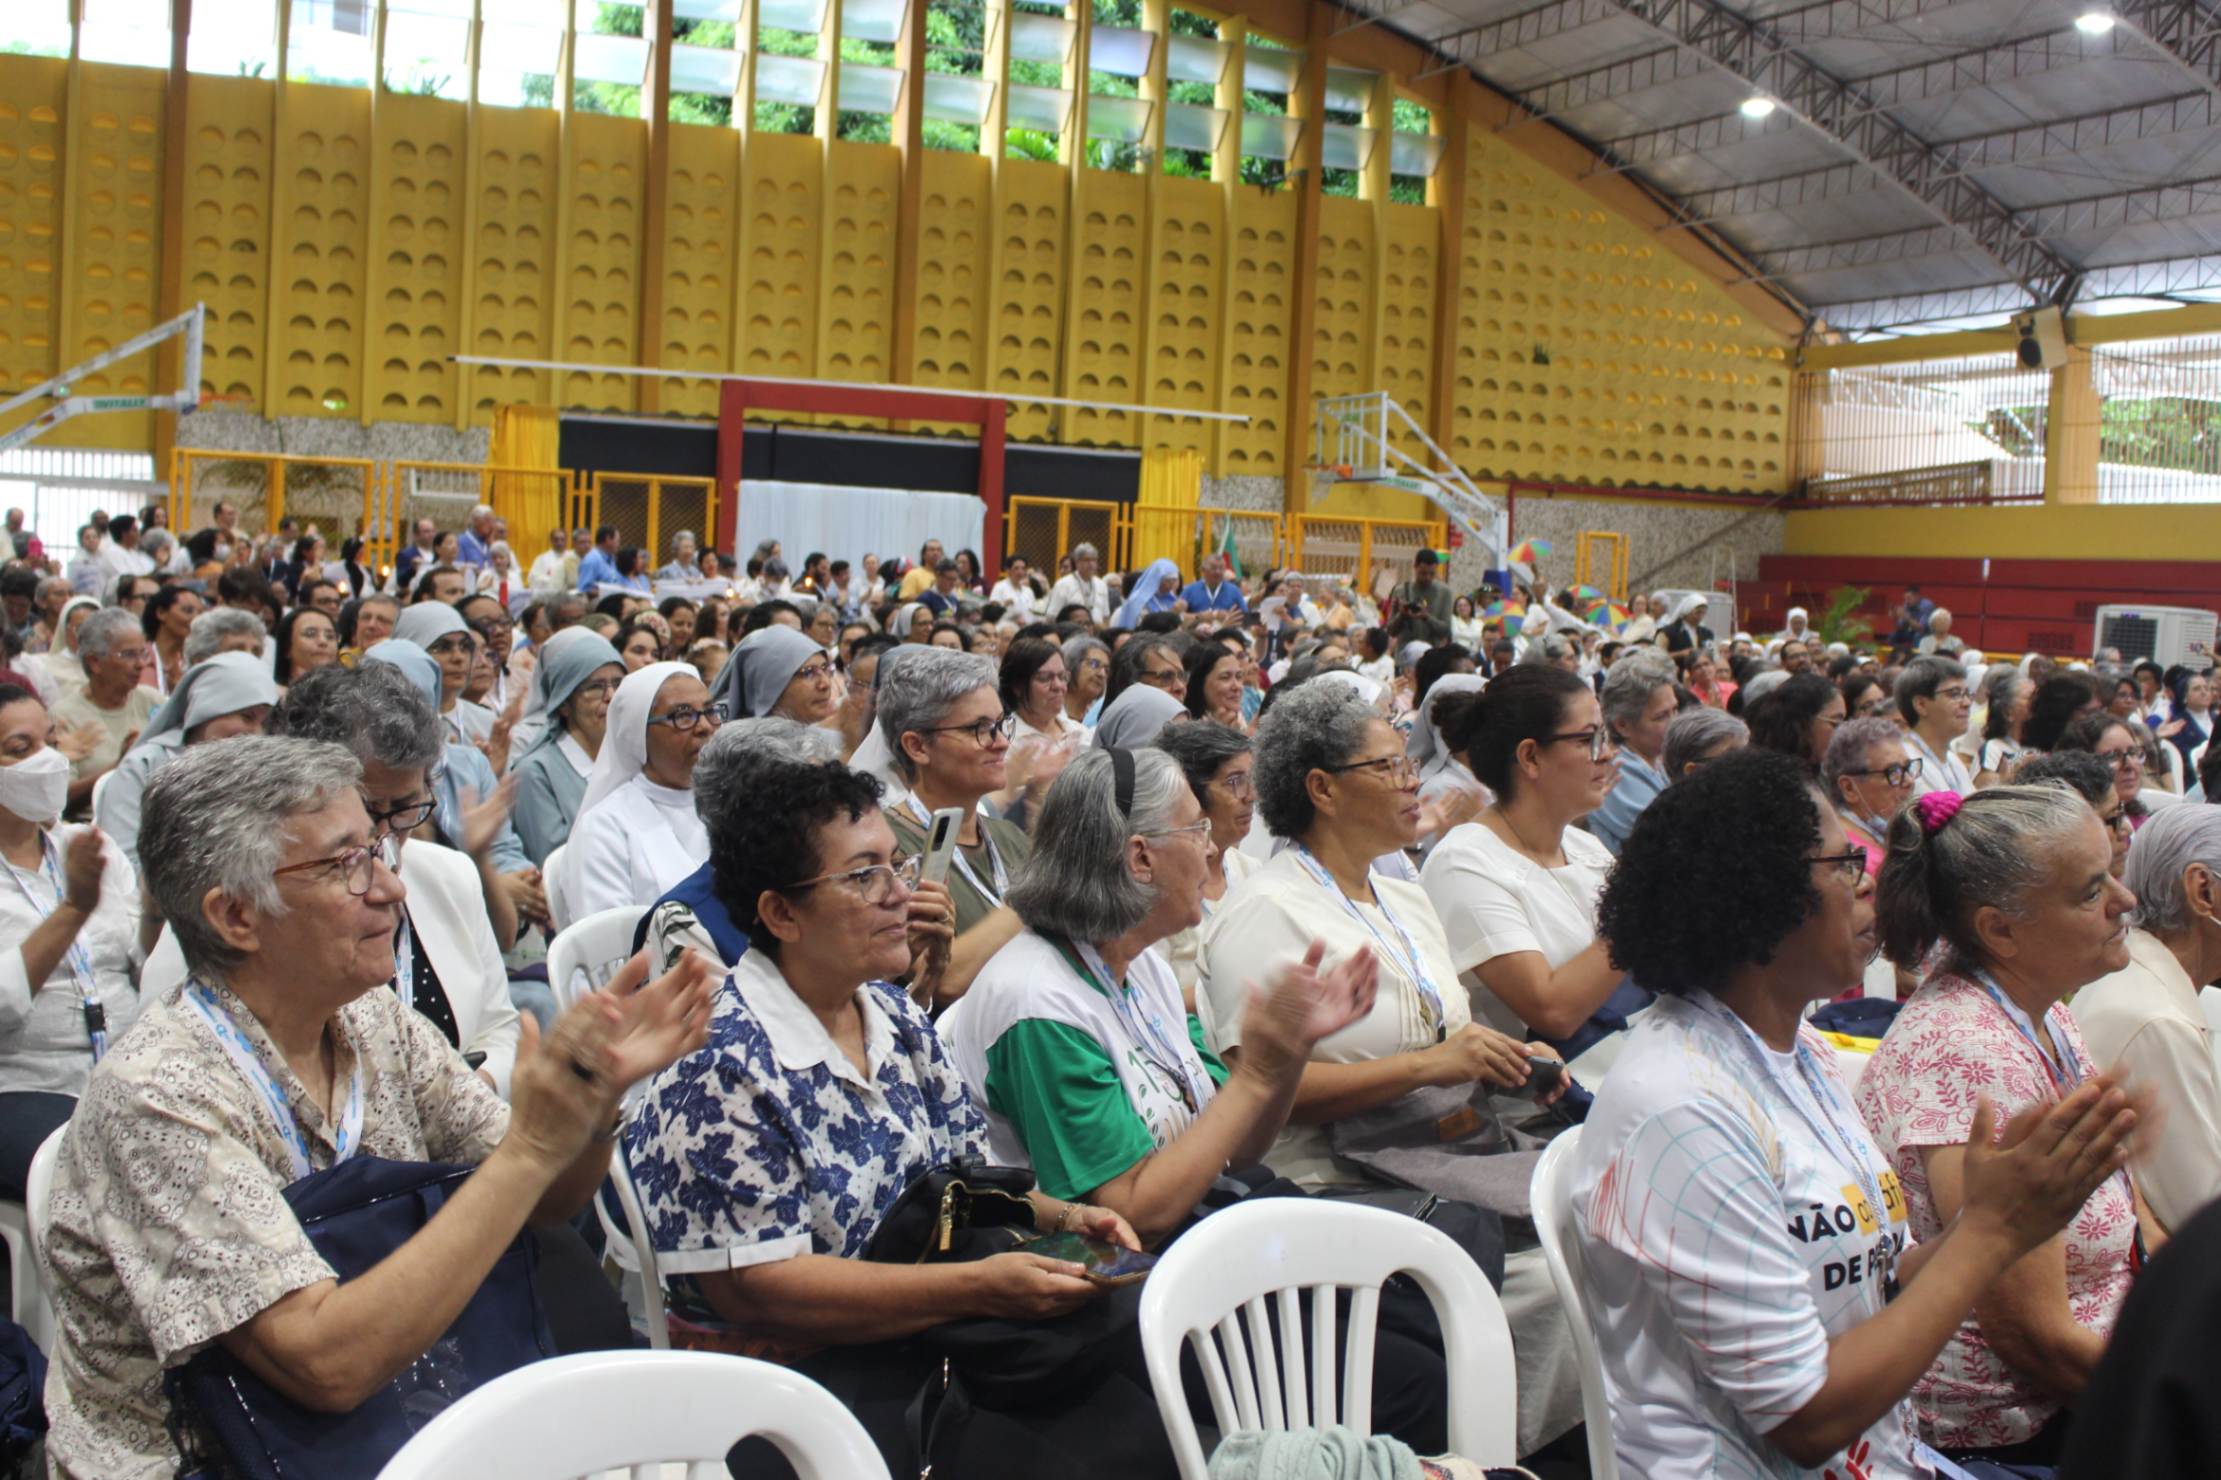 Religious from all over Brazil gathered in Fortaleza, Ceara, to celebrate the Congress of Religious of Brazil's 70th anniversary. 